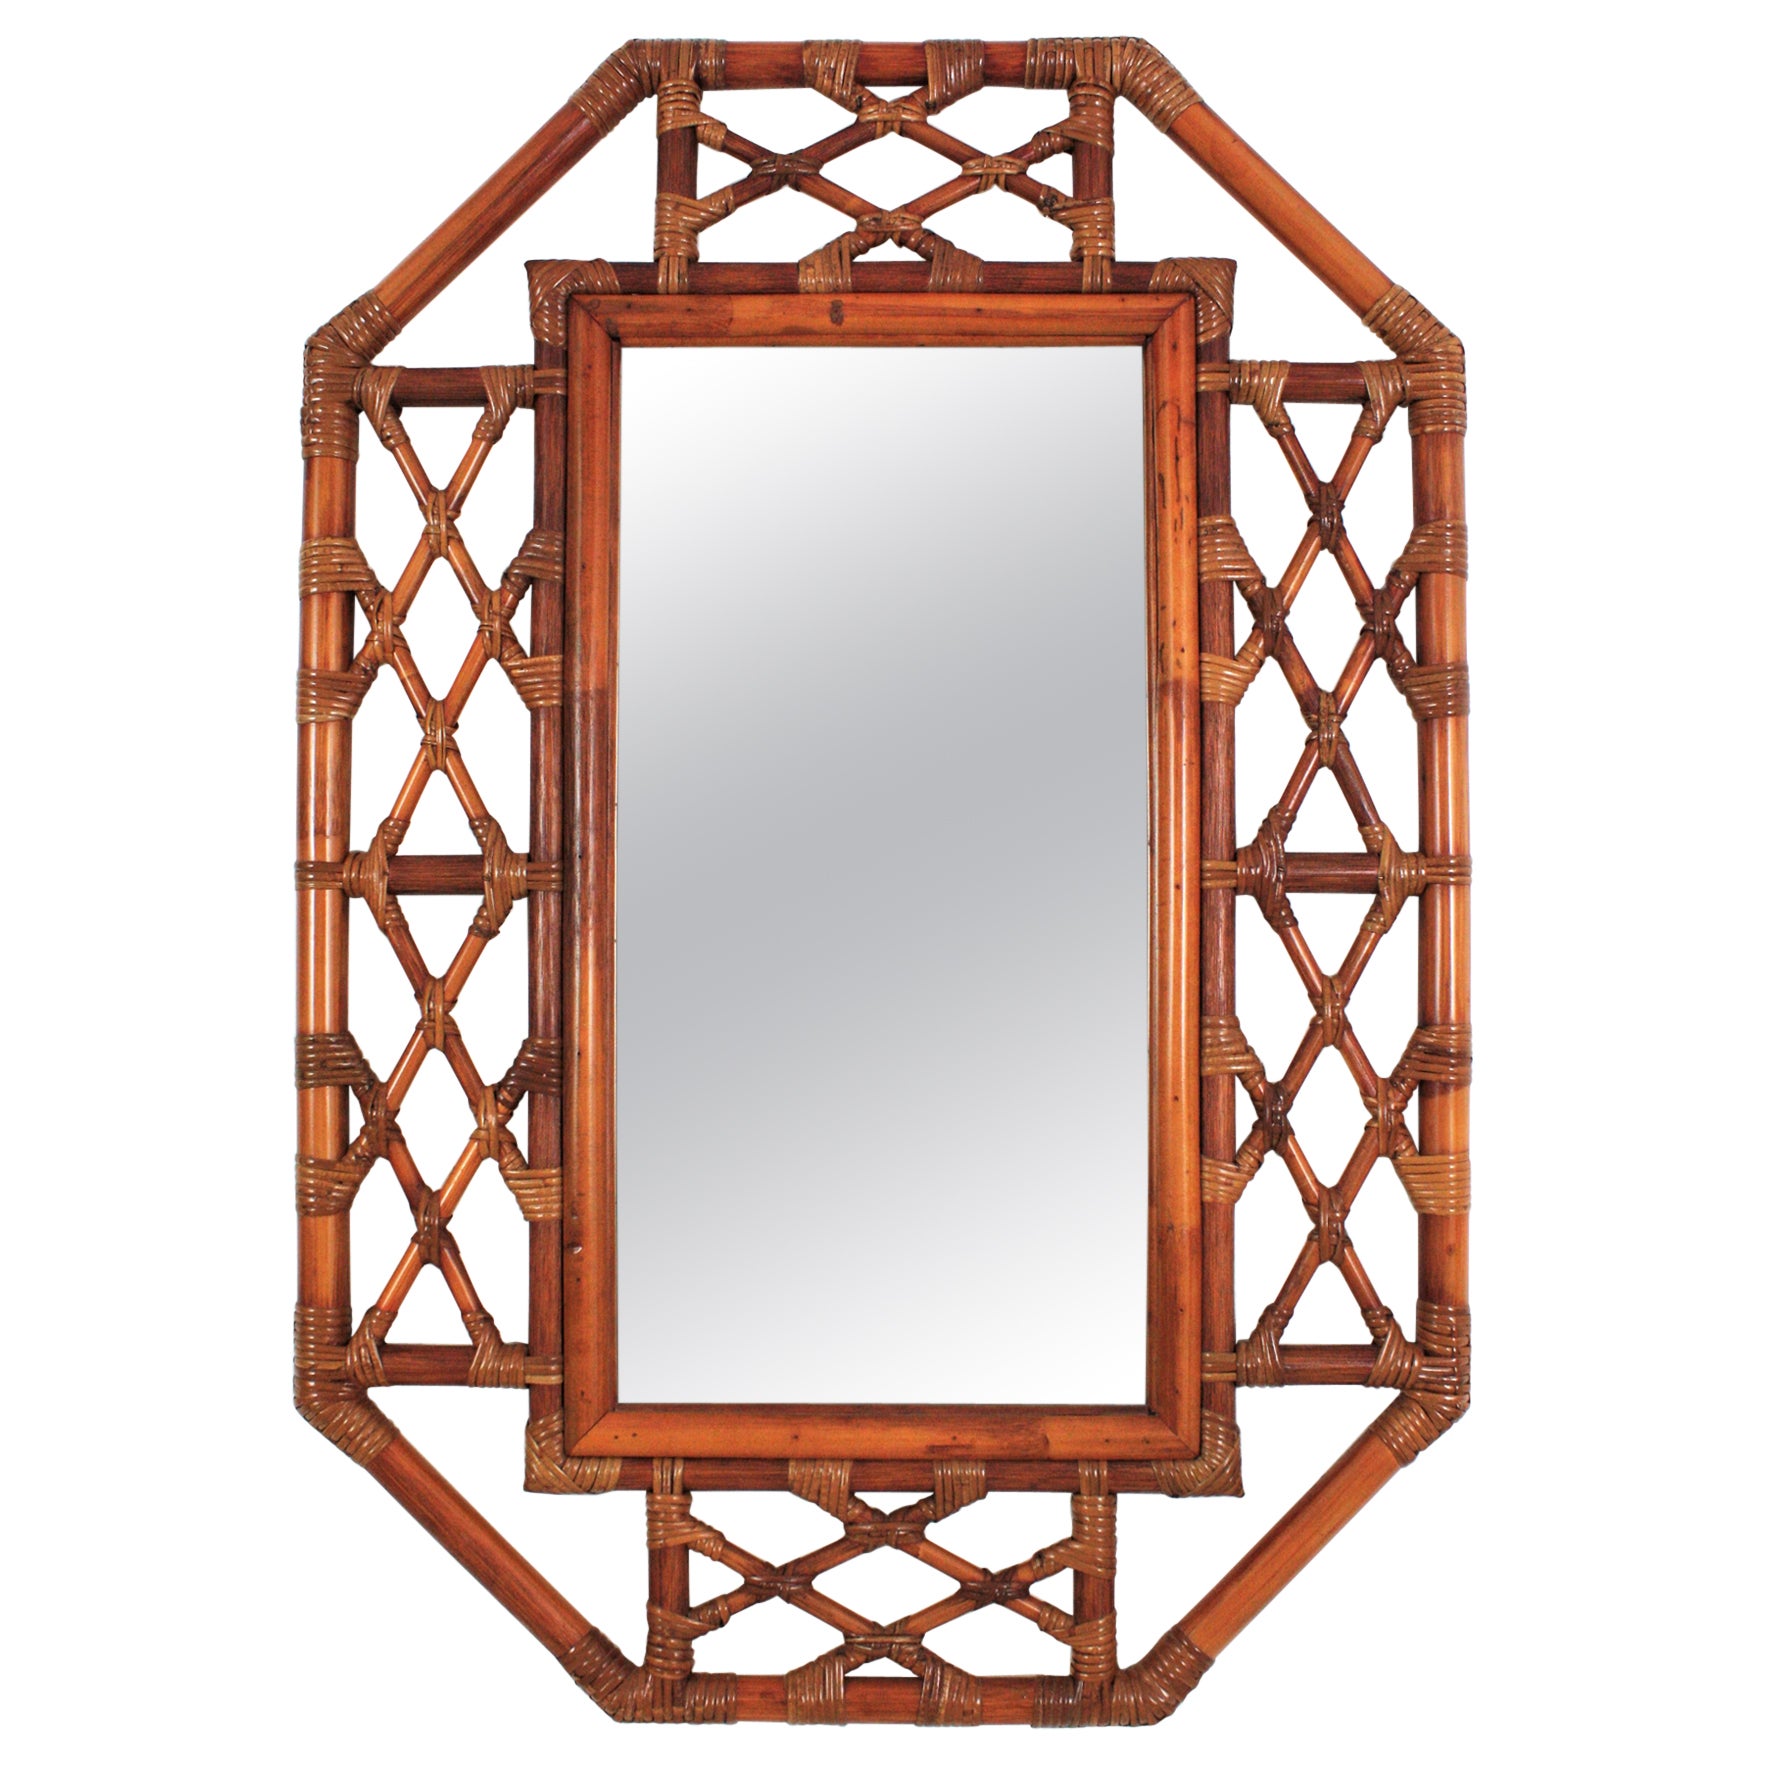 Spanish Large Rattan Bamboo Octagonal Wall Mirror For Sale